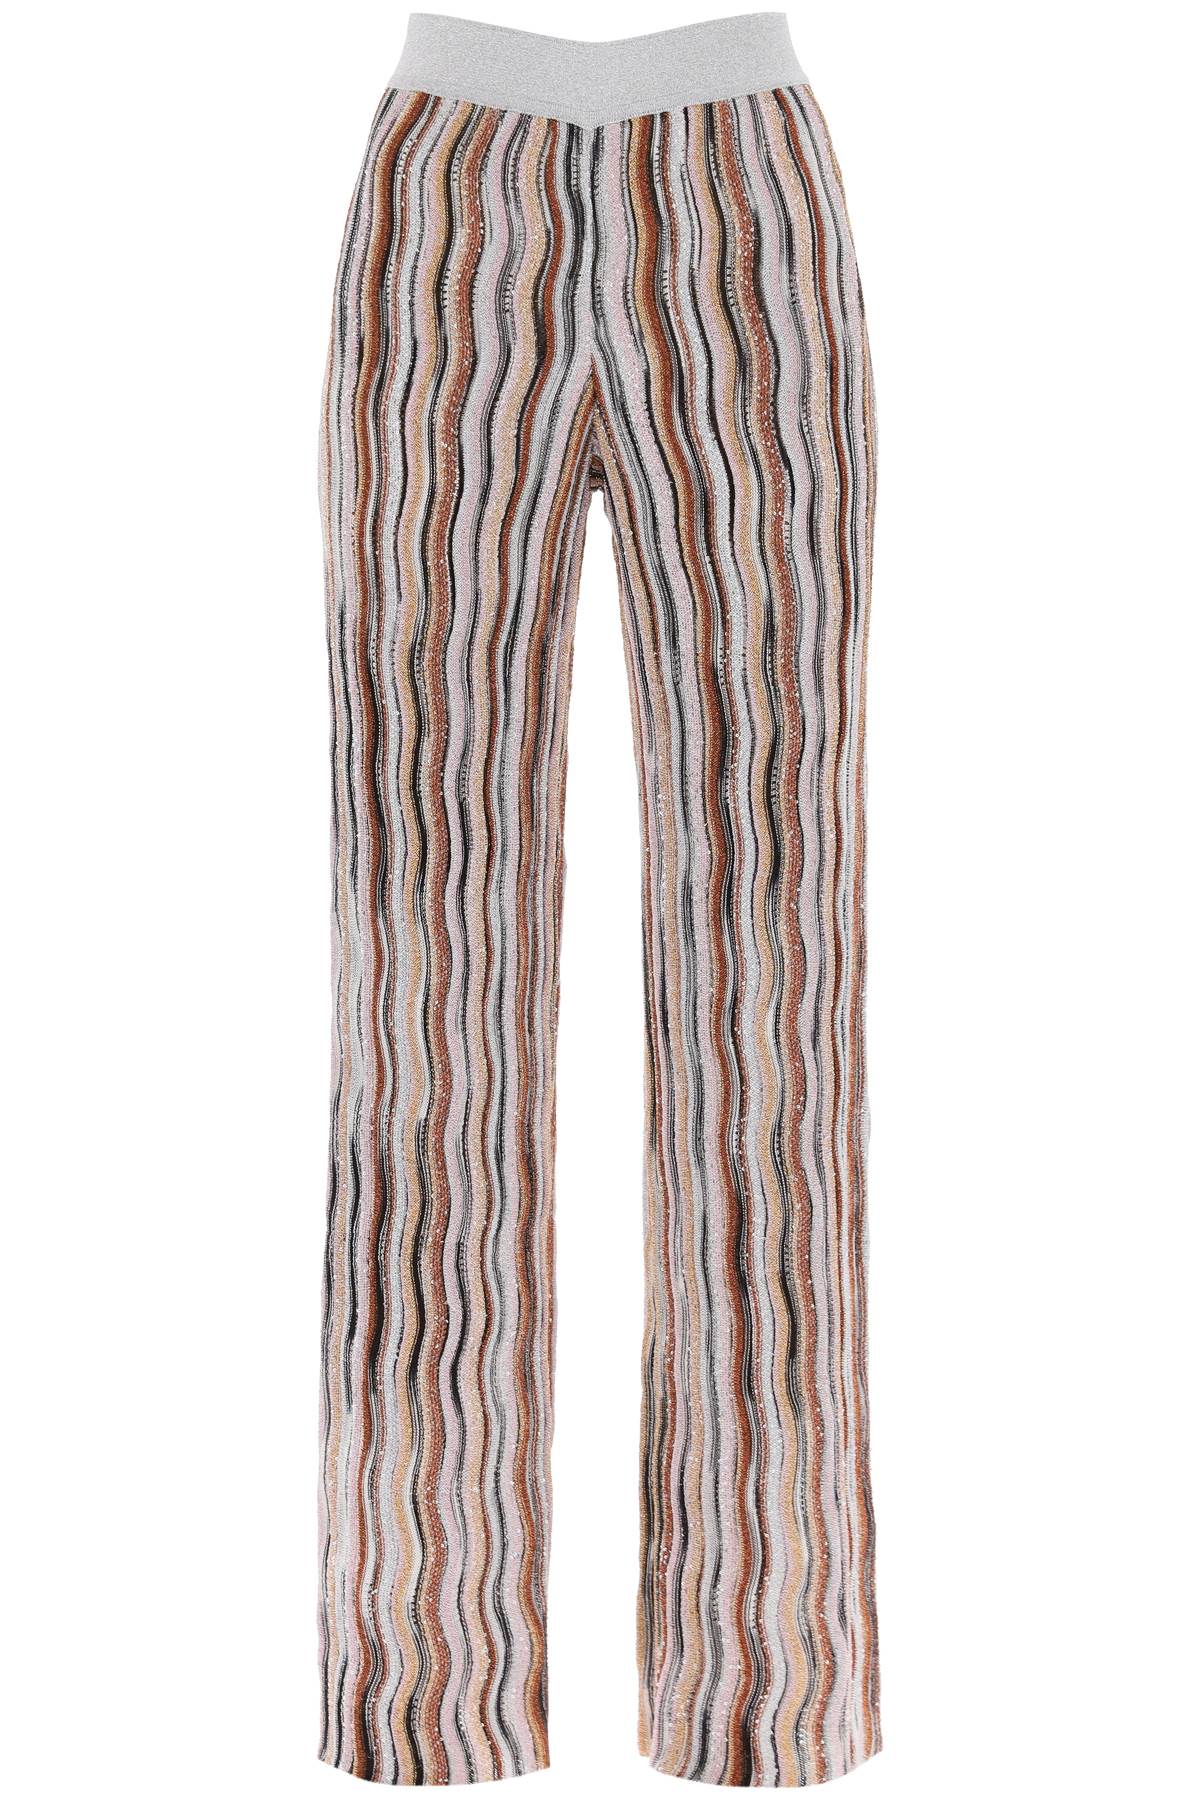 Shop Missoni Sequined Knit Pants With Wavy Motif In Multi Paill Orang Re (metallic)